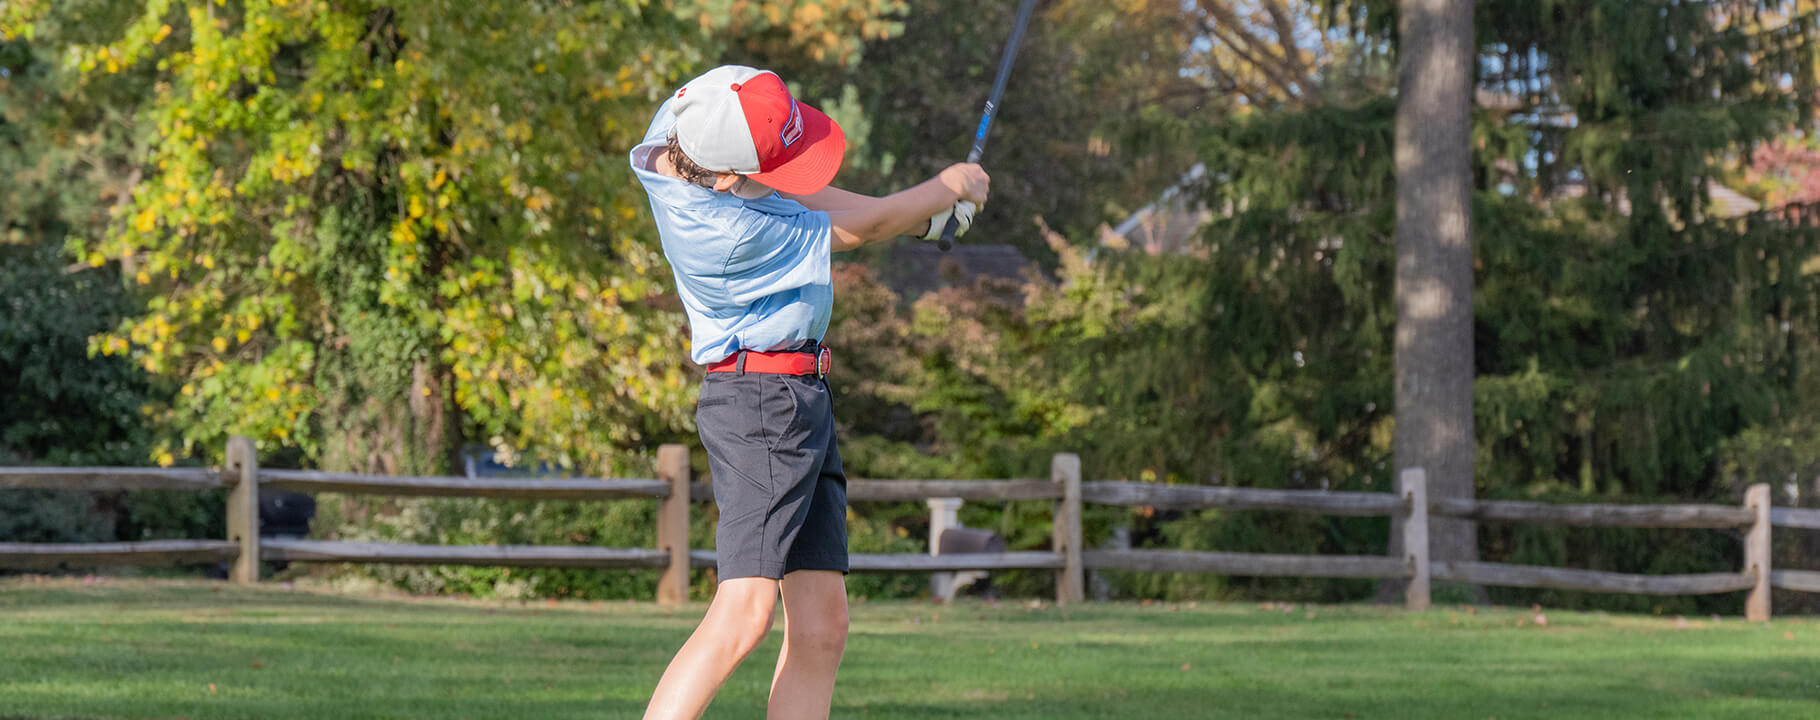 young golfer in full swing